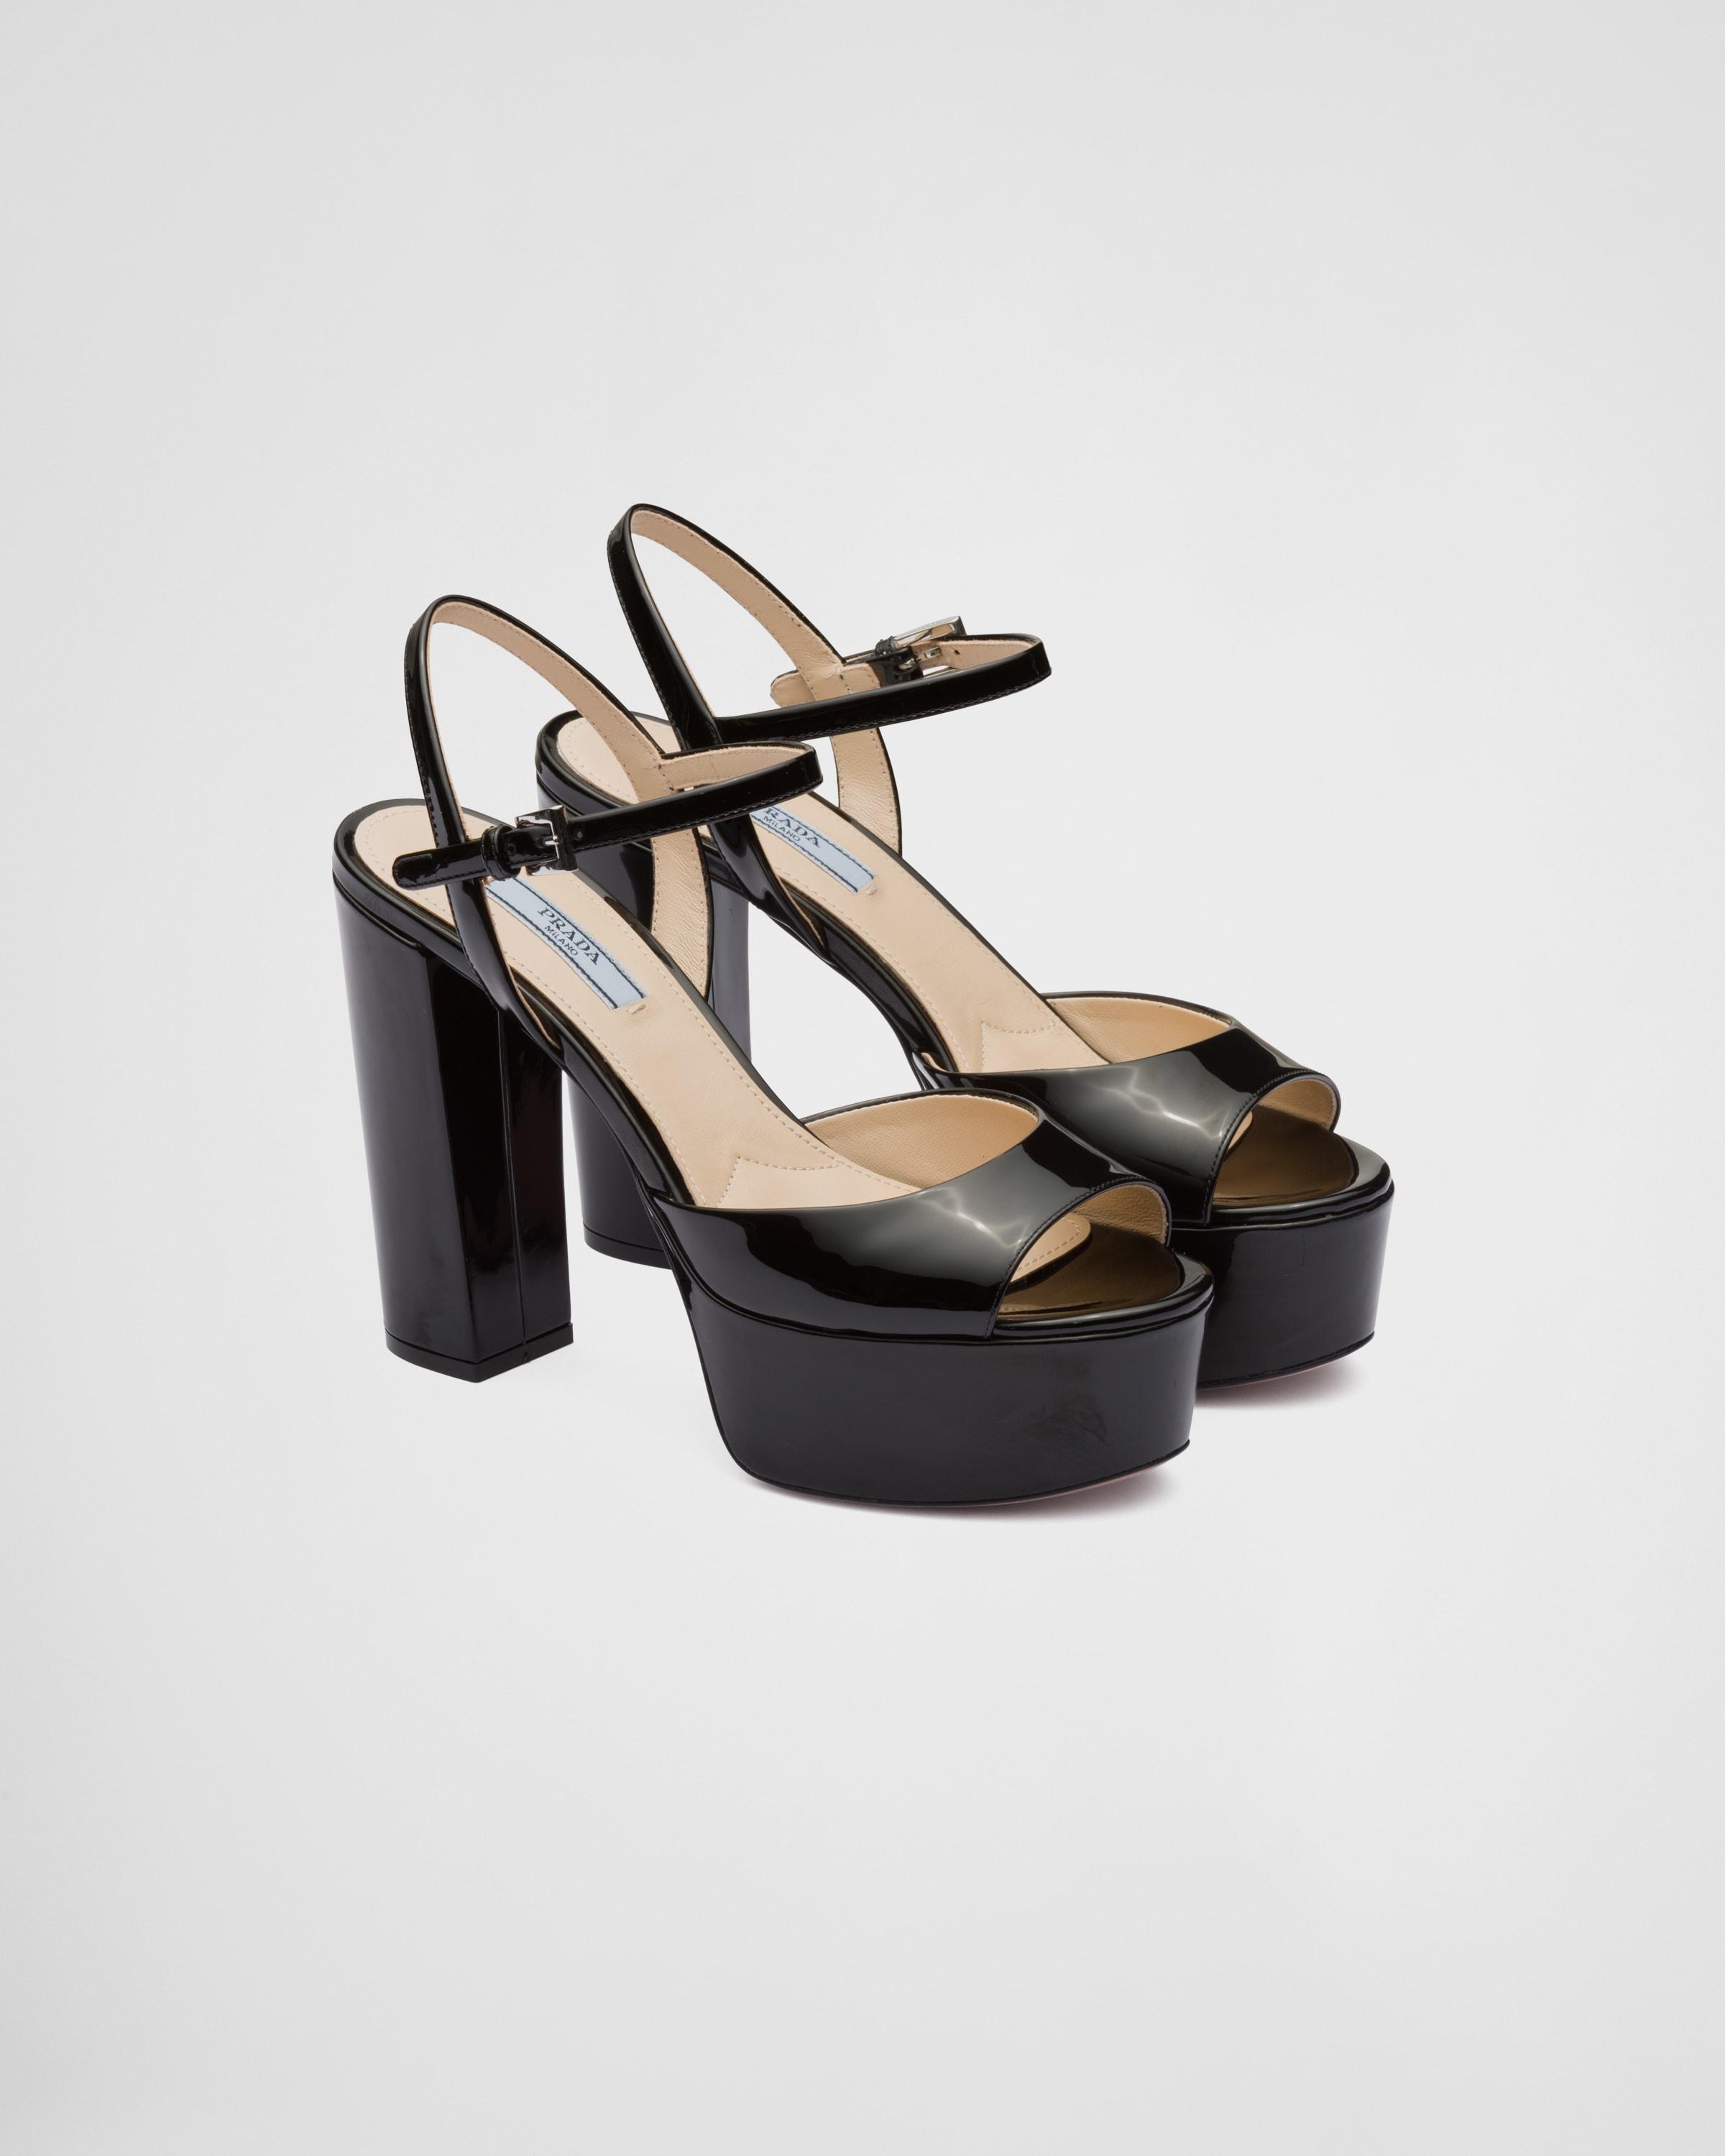 Prada High-heeled Patent Leather Sandals in Black | Lyst